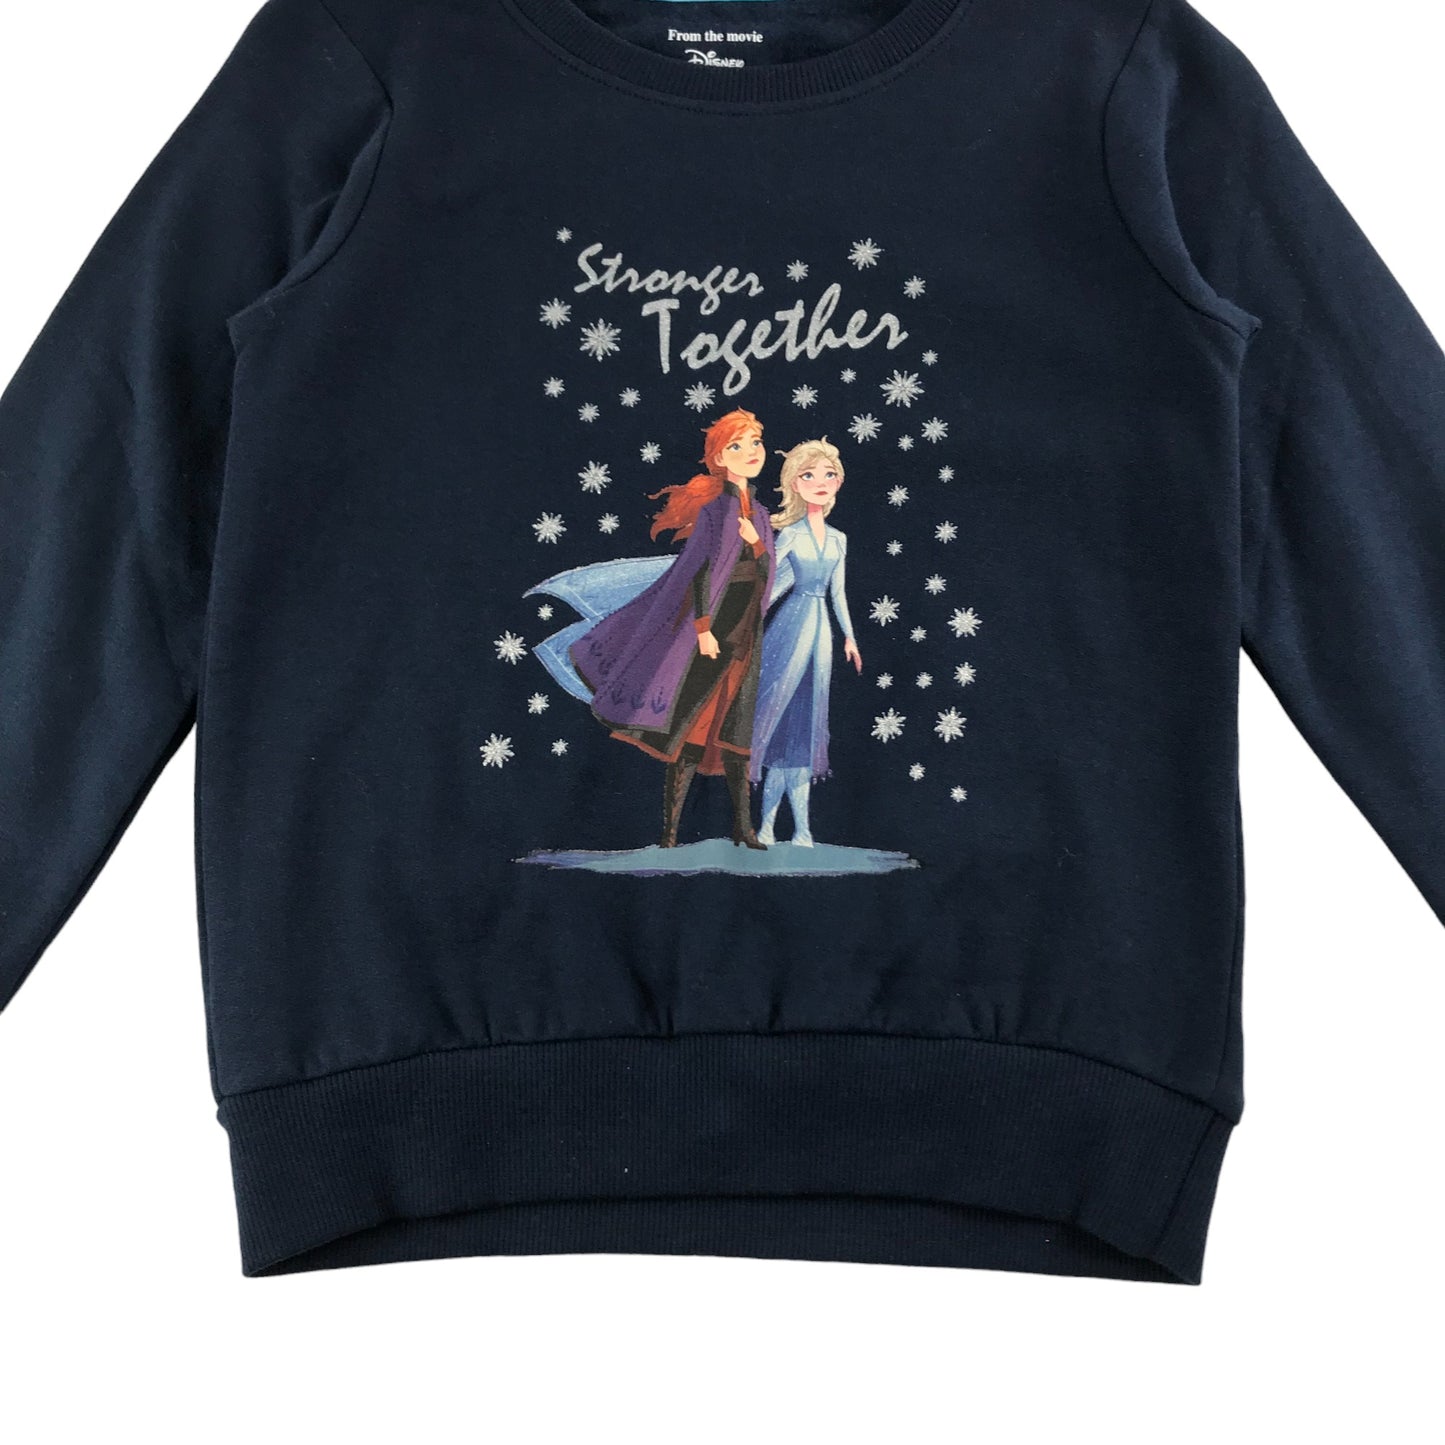 Character.com Sweater Age 6 Navy Blue Disney Frozen Jersey Pullover Cotton